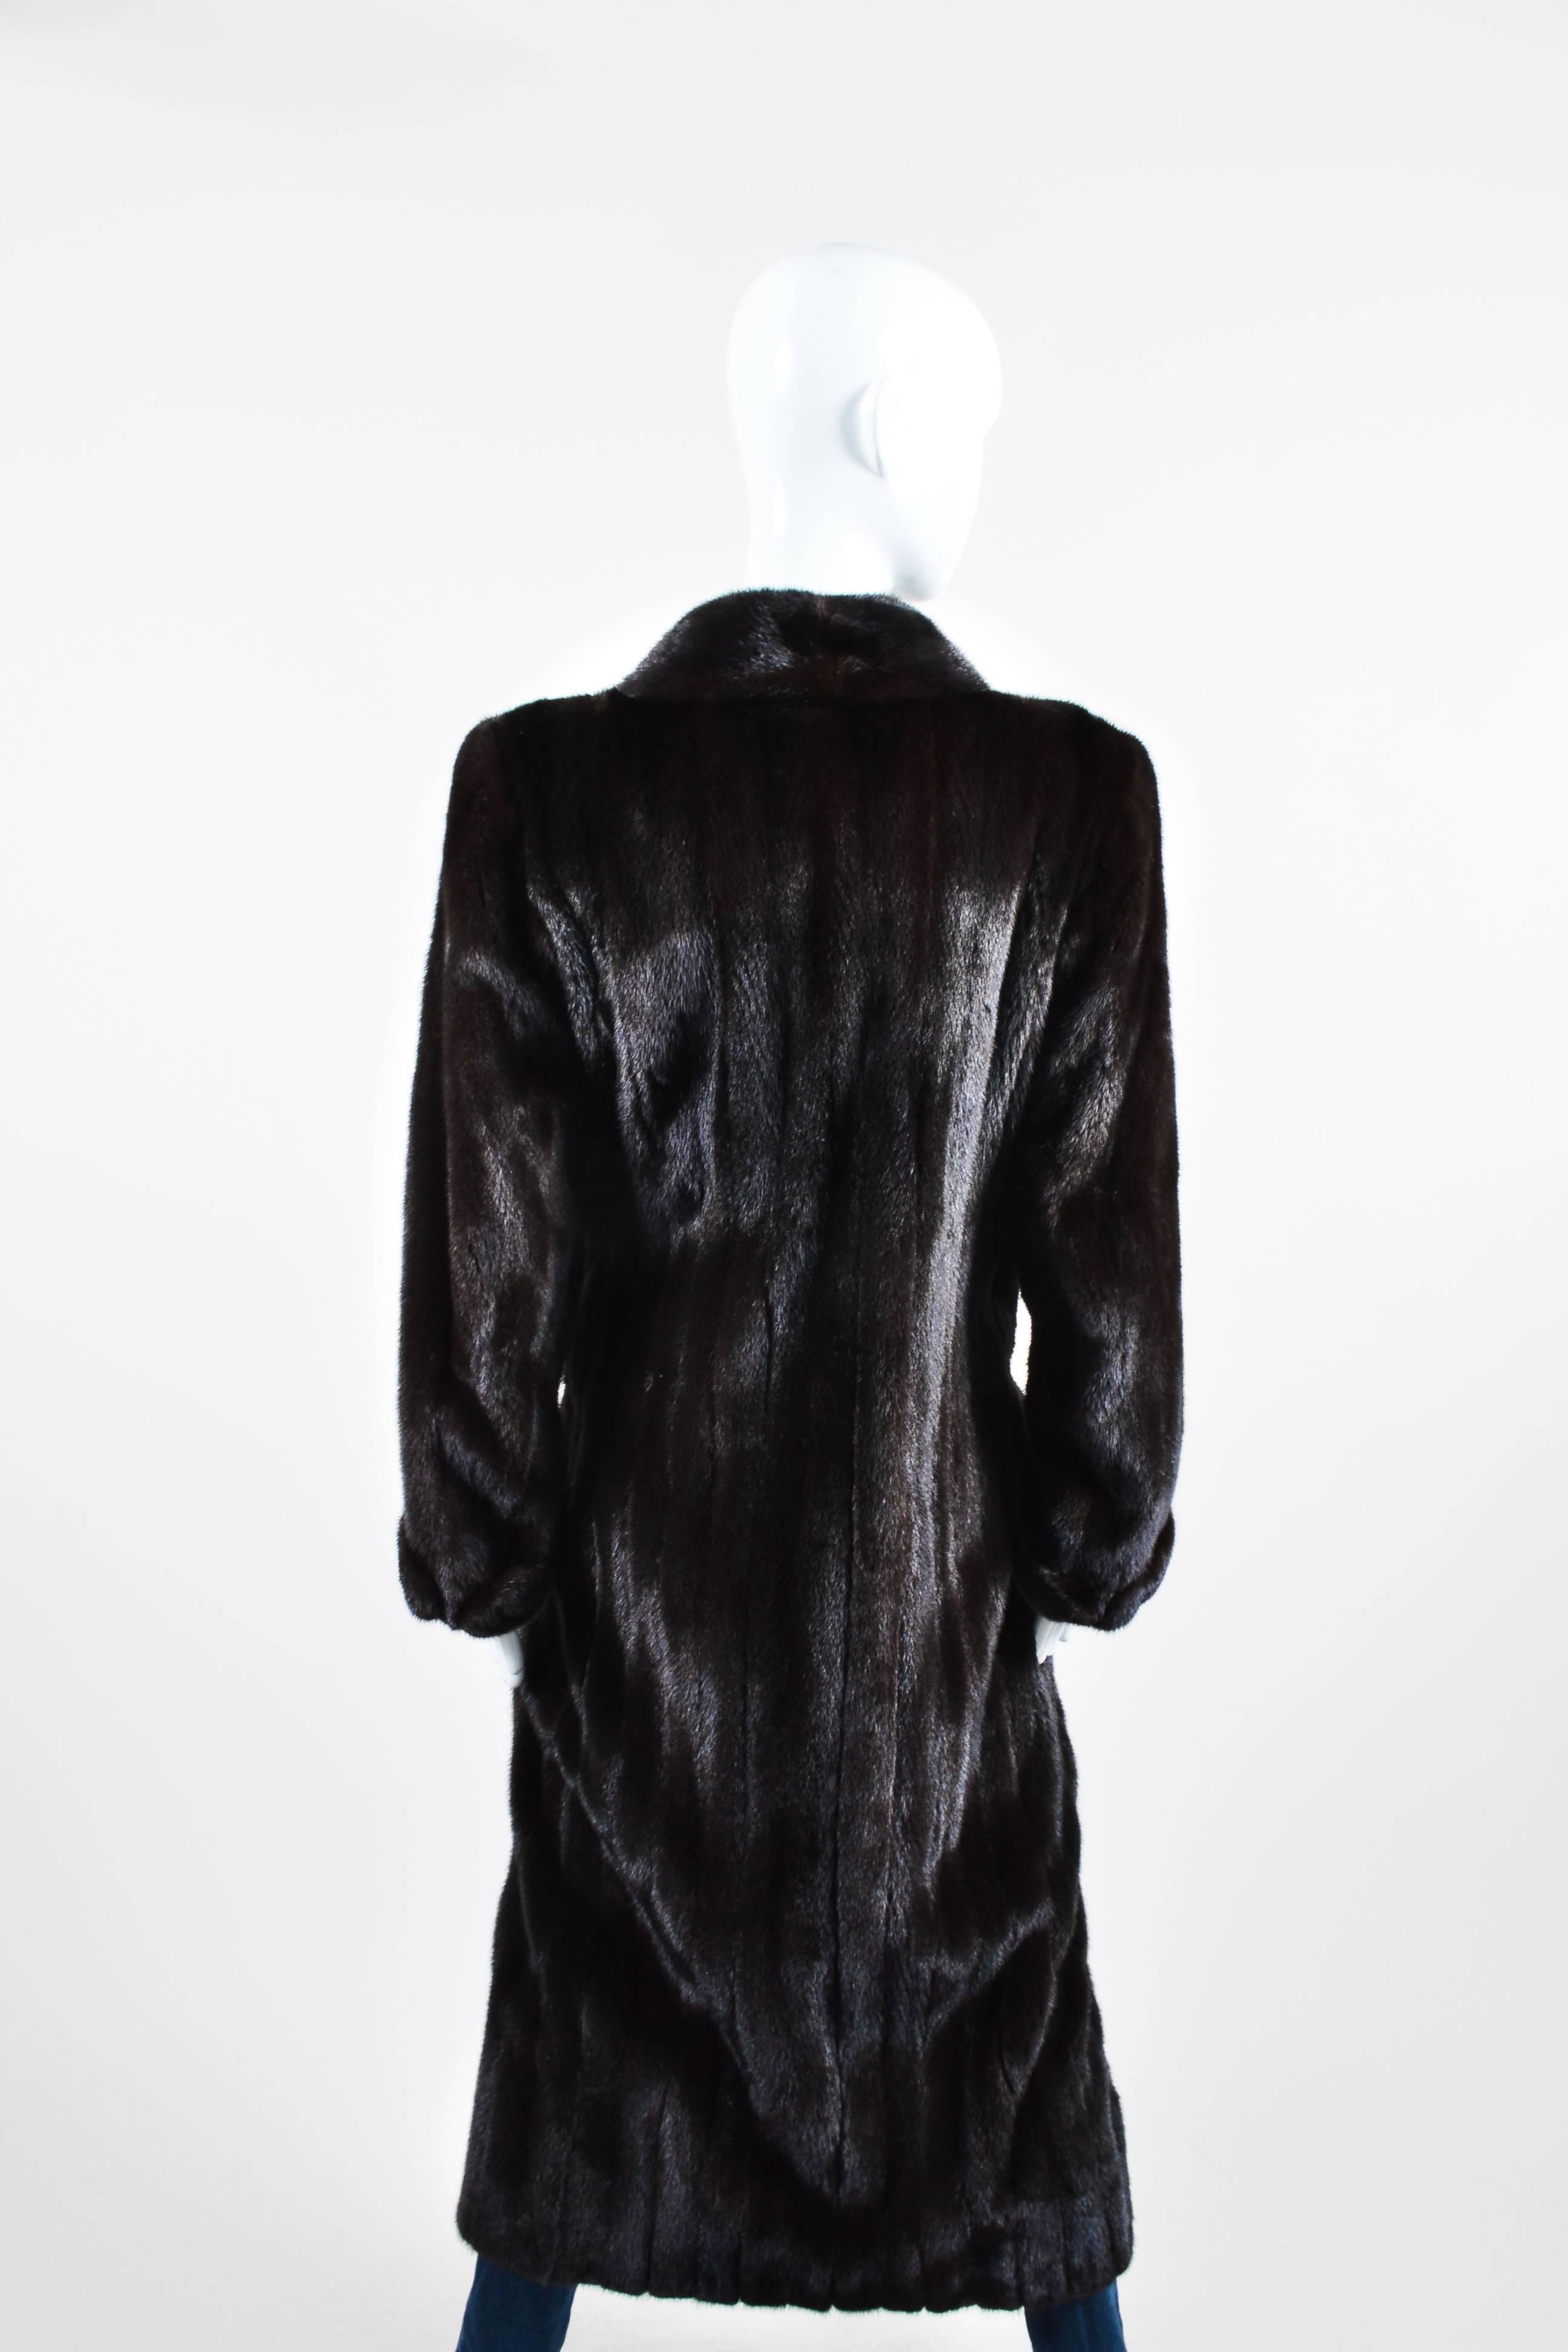 Dark brown mink fur coat. Long sleeves. Shawl collar. Slit pockets. Light shoulder padding. Interior pocket. Single button closure. Lined.

Size: Unknown, no sizing information provided. Refer to measurements.

Additional measurements: Sleeve